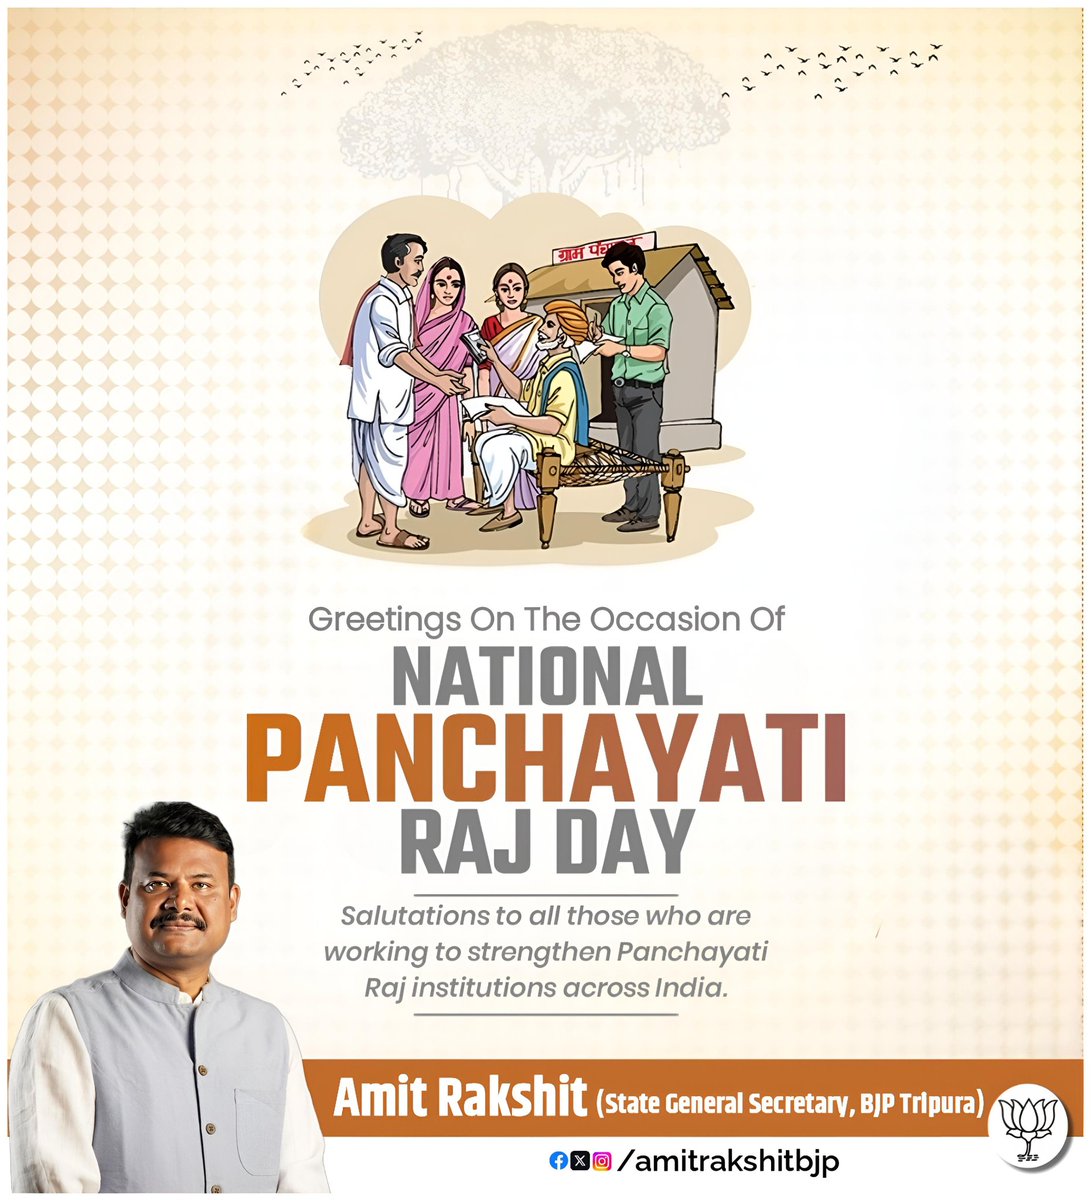 Happy National Panchayati Raj Day! 🇮🇳

Let's honor the grassroots democracy that empowers communities across India. 

Together, let's commit to strengthening our Panchayats for a brighter future. #PanchayatiRajDay